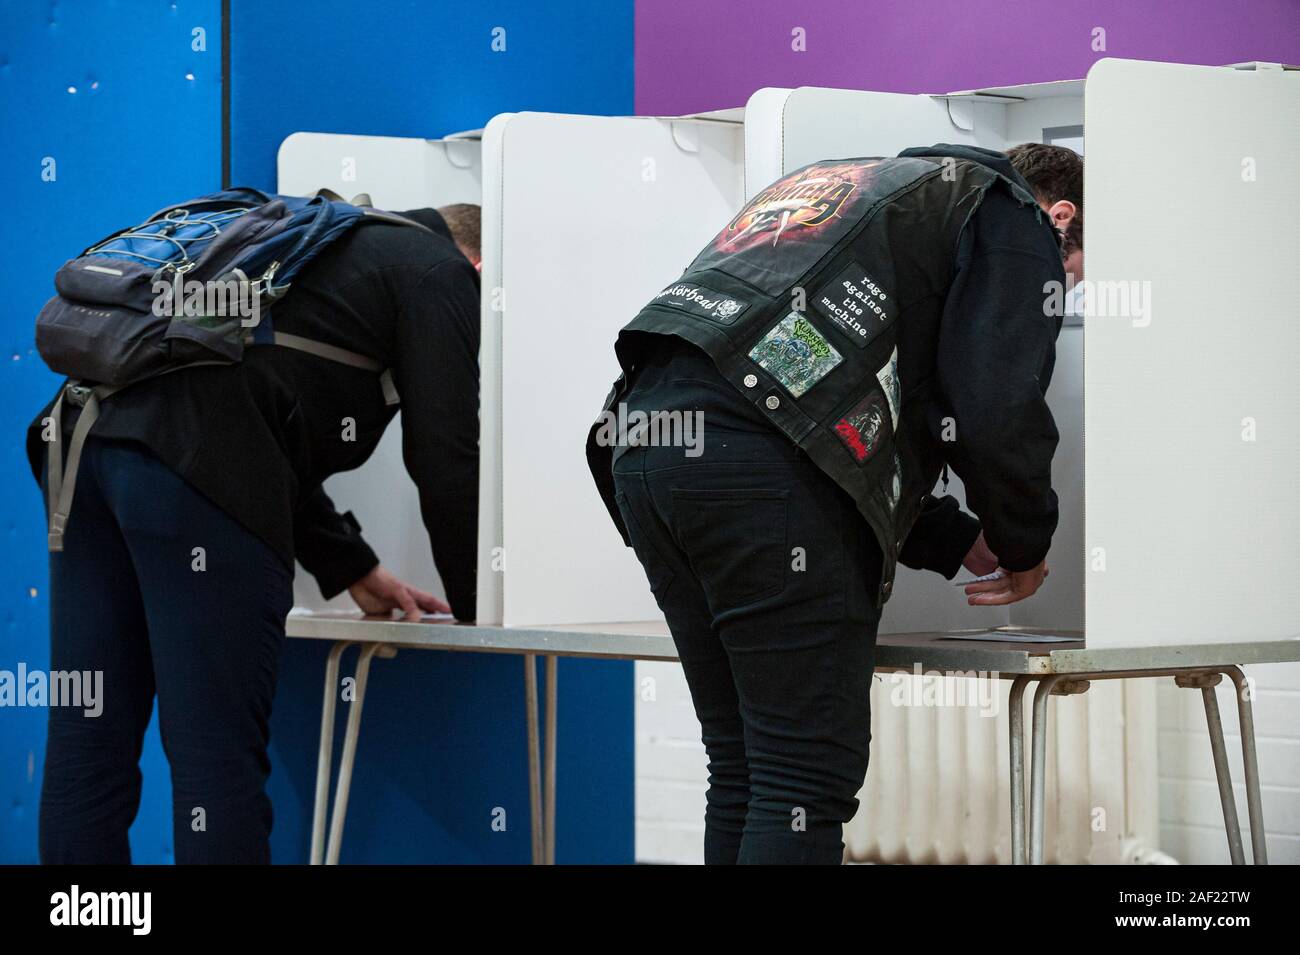 Wirral, UK. 12th December 2019. An early, busy start to voting, as polling stations open across the UK in the general election, the first to be held in December since 1923. Pictured are two voters filling in their ballot paper.  Credit: Paul Warburton/Alamy Live News Stock Photo